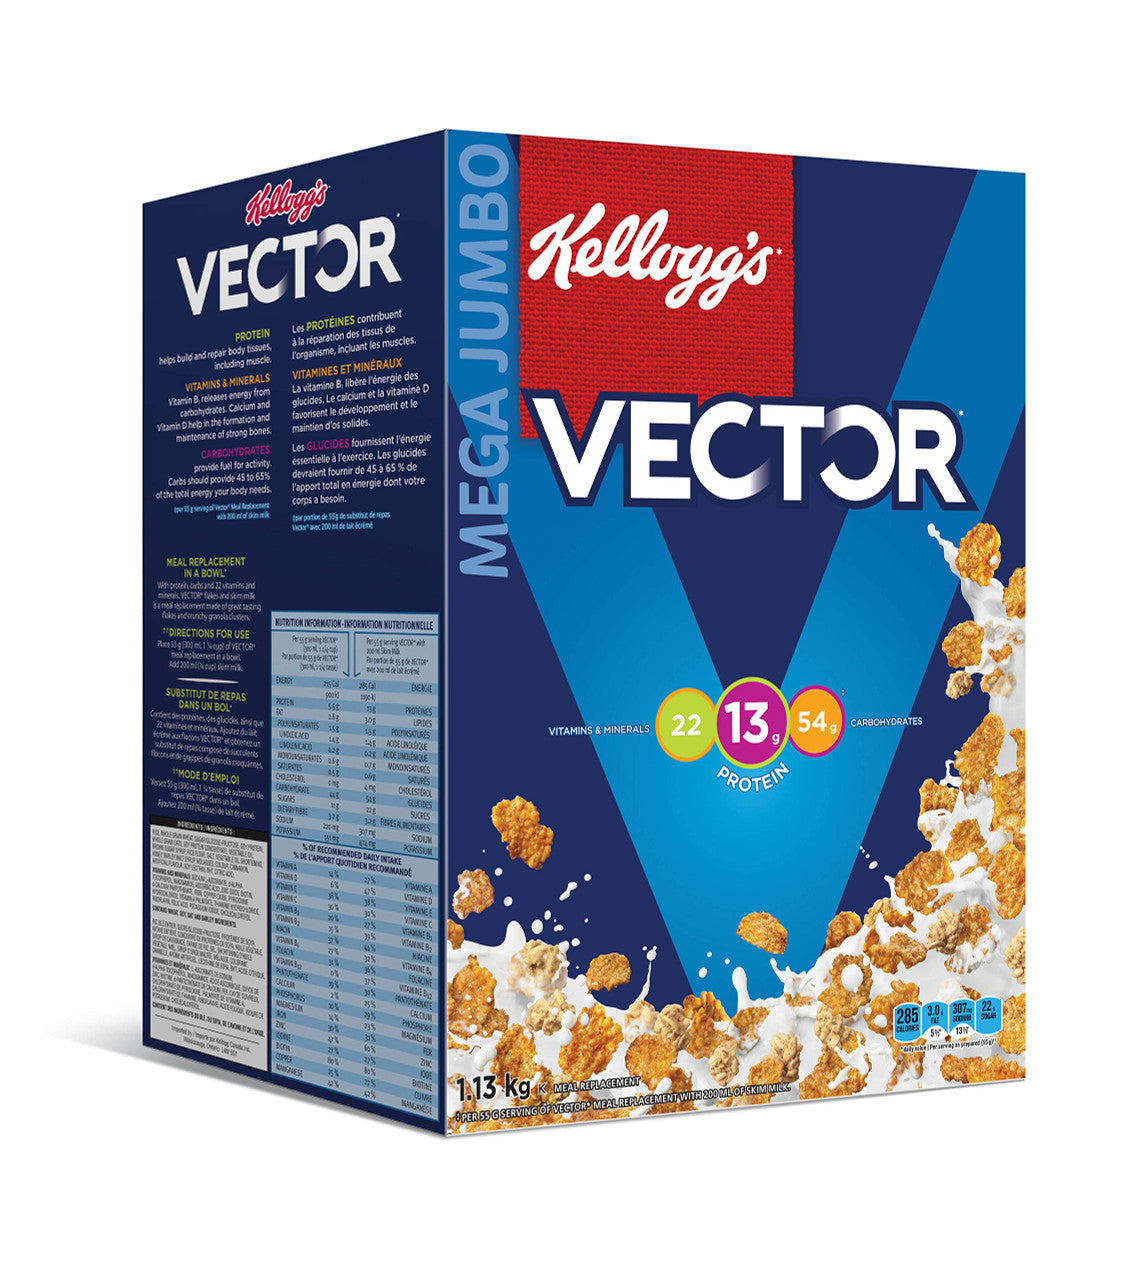 Kellogg's Vector Meal Replacement Cereal, 1.13 Kg/2.5lbs (Imported from Canada)